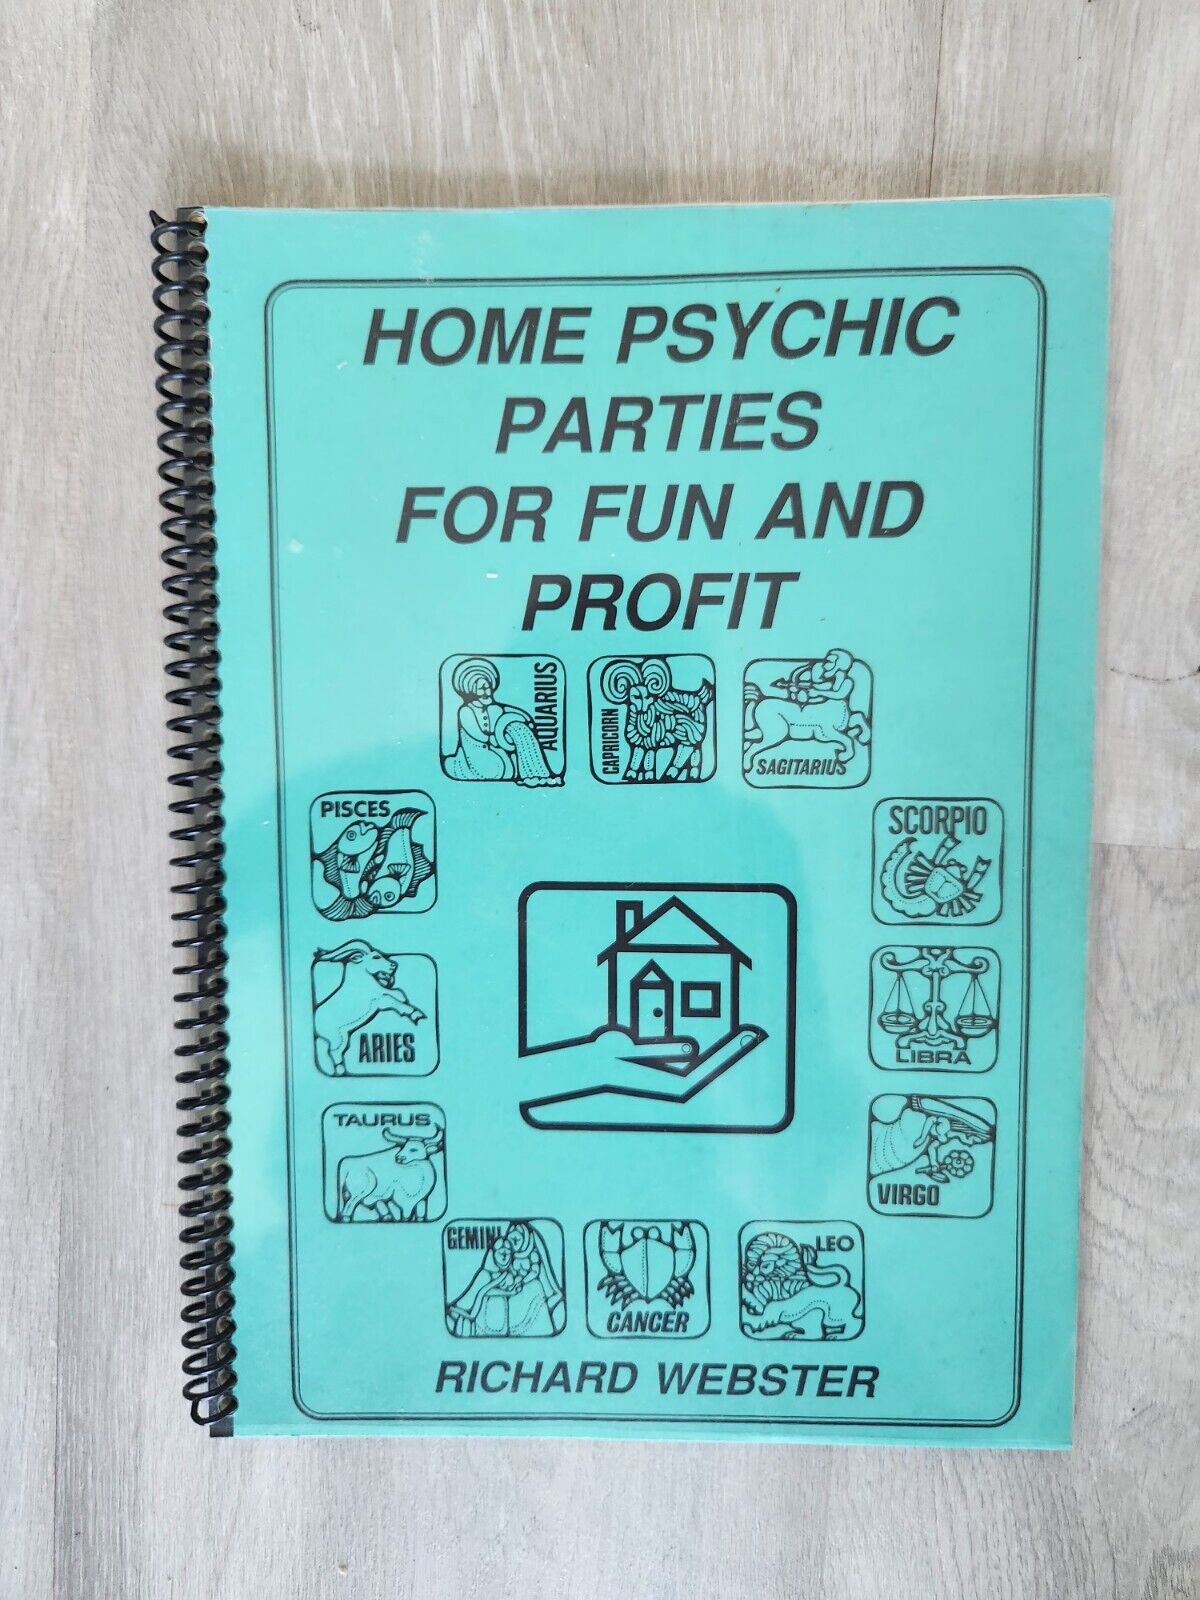 Home Psychic Parties For Fun & Profit by Richard Webster Mentalism Magic